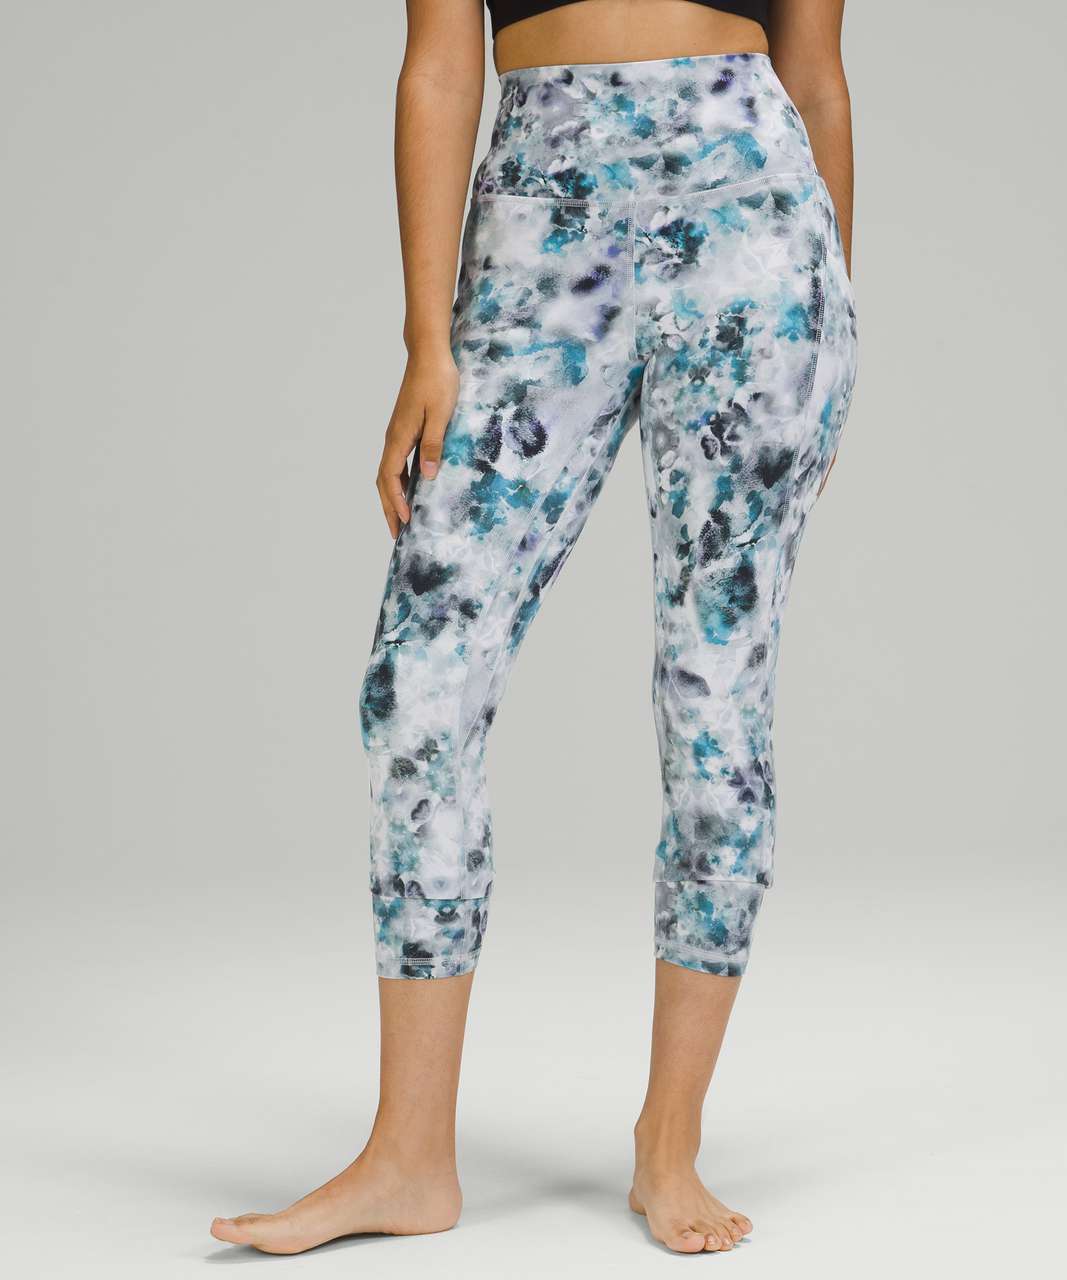 Lululemon Align High Rise Crop with Pockets 23" - Kaleidofloral Multi